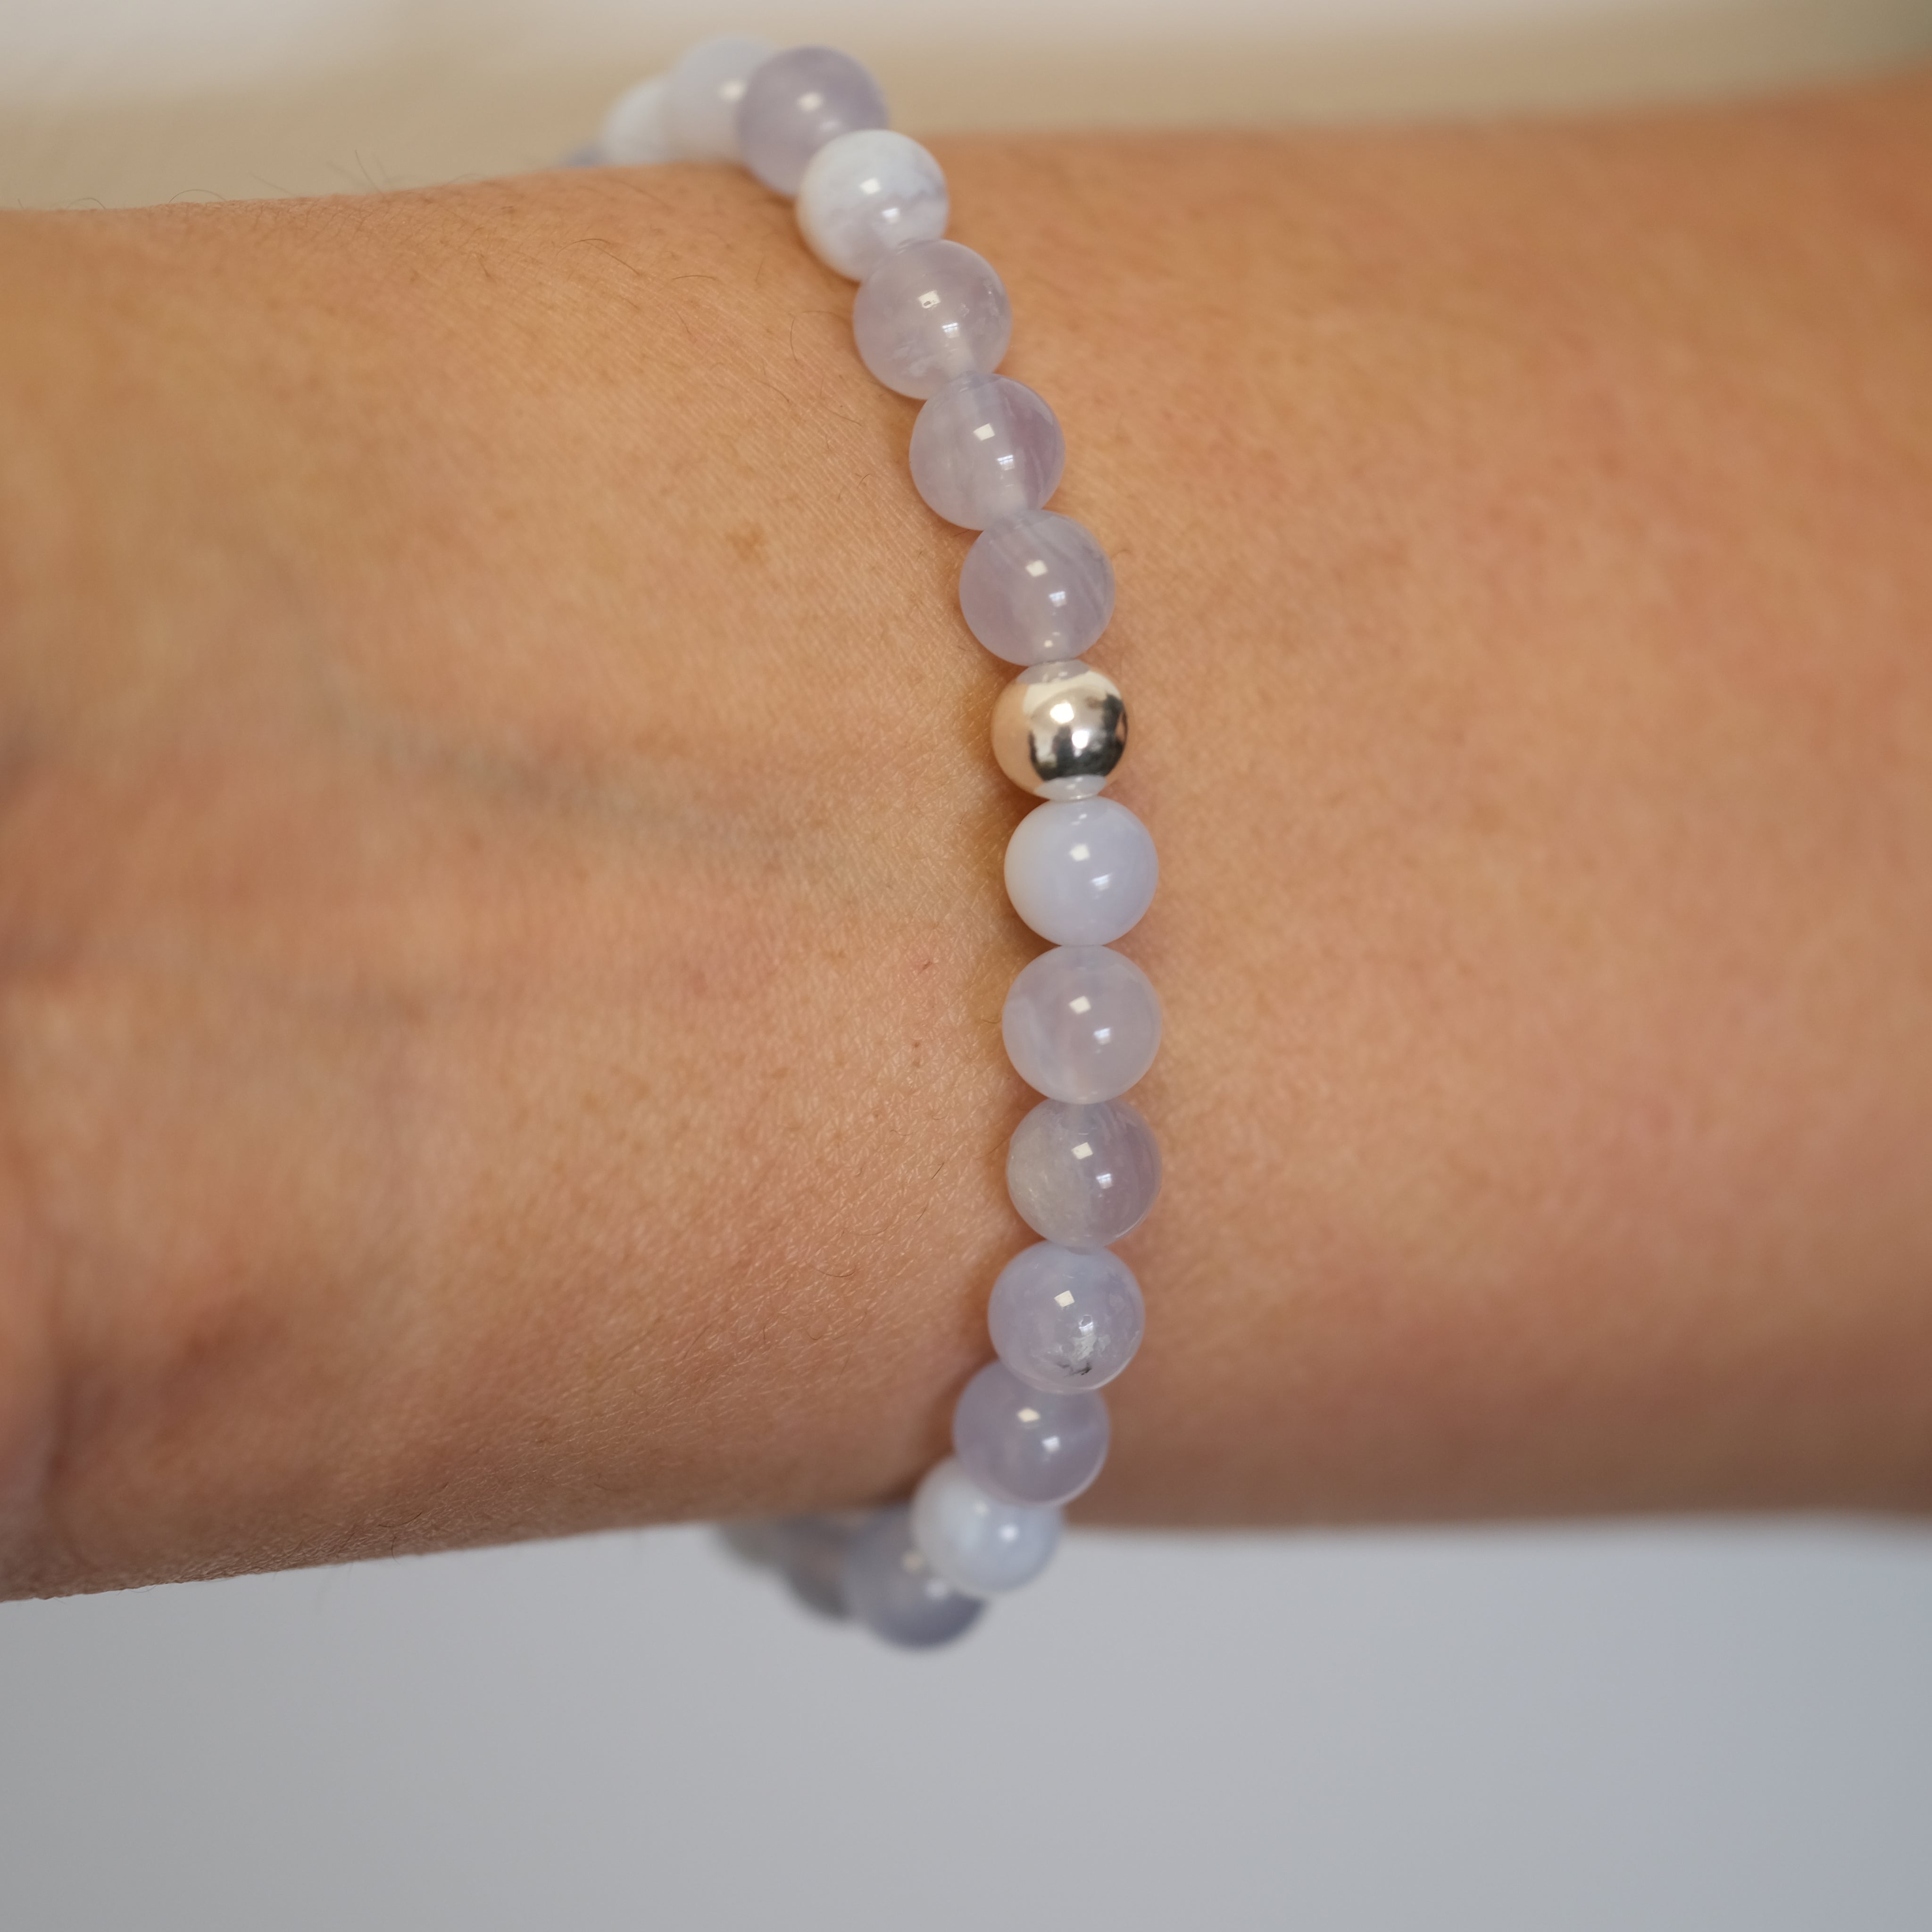 Blue lace agate gemstone bracelet in 6mm beads worn on a model's wrist from the back